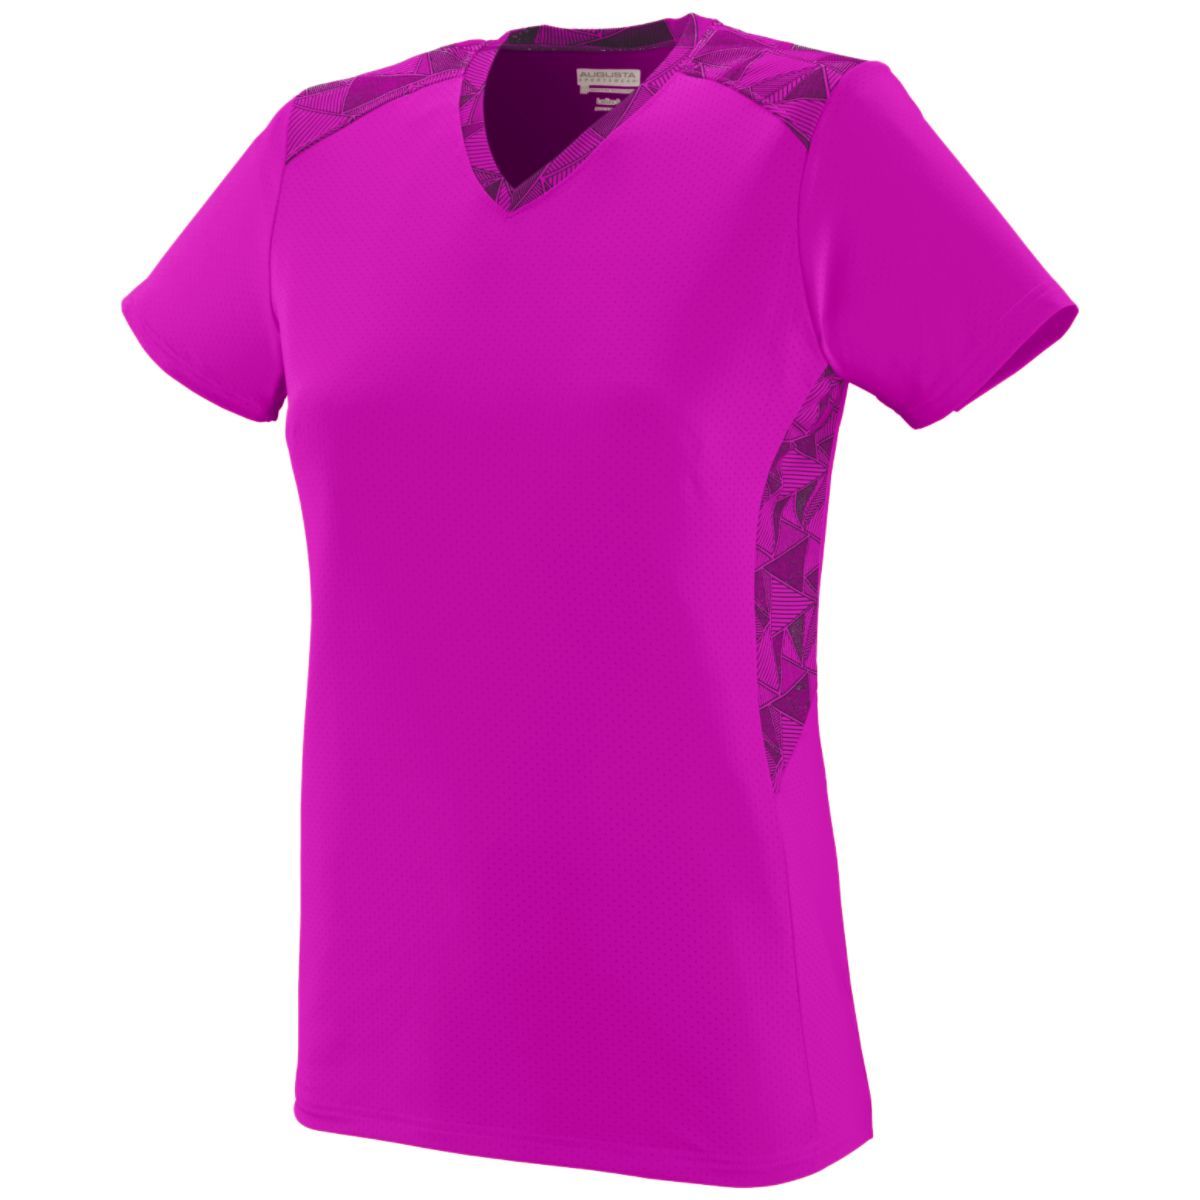 Augusta Sportswear Ladies Vigorous Jersey in Power Pink/Power Pink/Black Print  -Part of the Ladies, Ladies-Jersey, Augusta-Products, Softball, Shirts product lines at KanaleyCreations.com